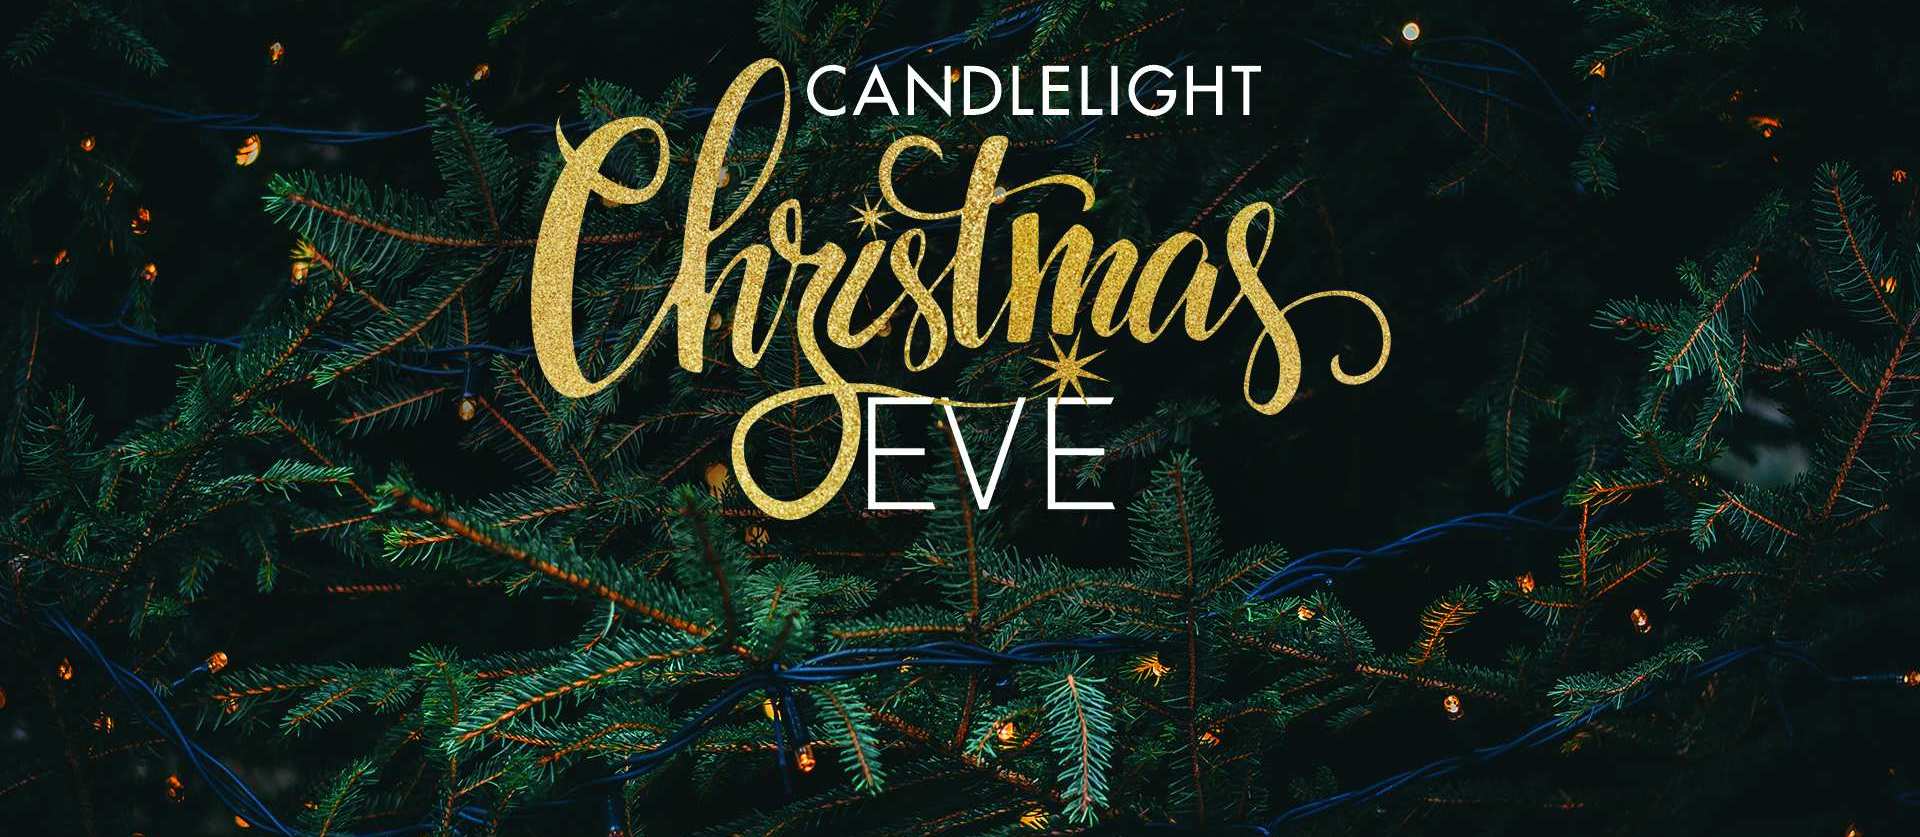 "Candlelight Christmas Eve" on a pine tree background